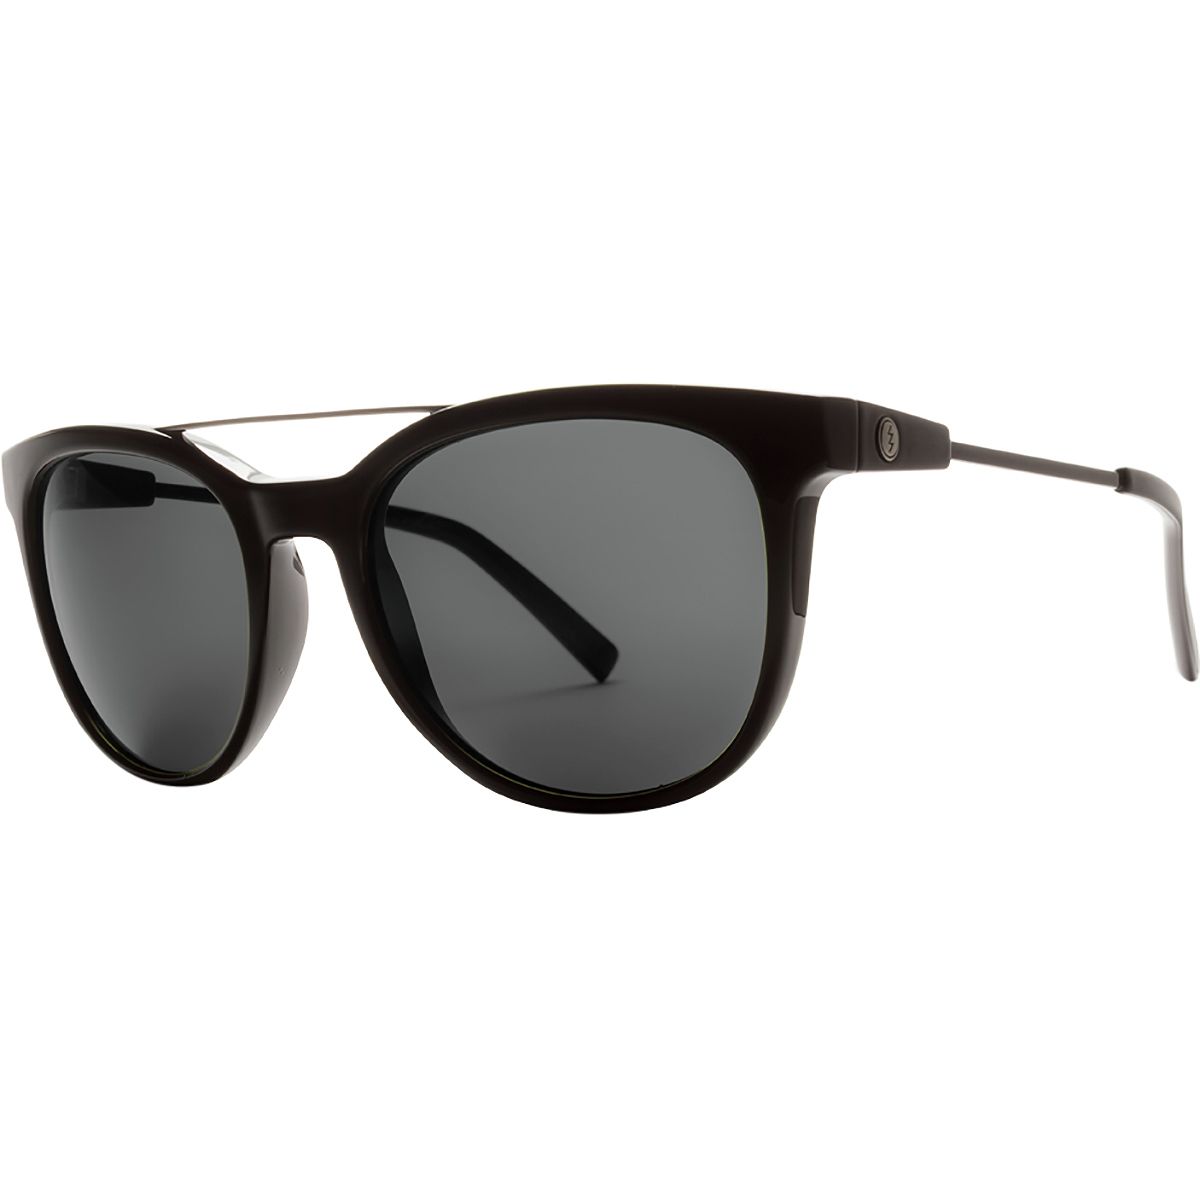 Electric Bengal Wire Polarized Sunglasses - Women's